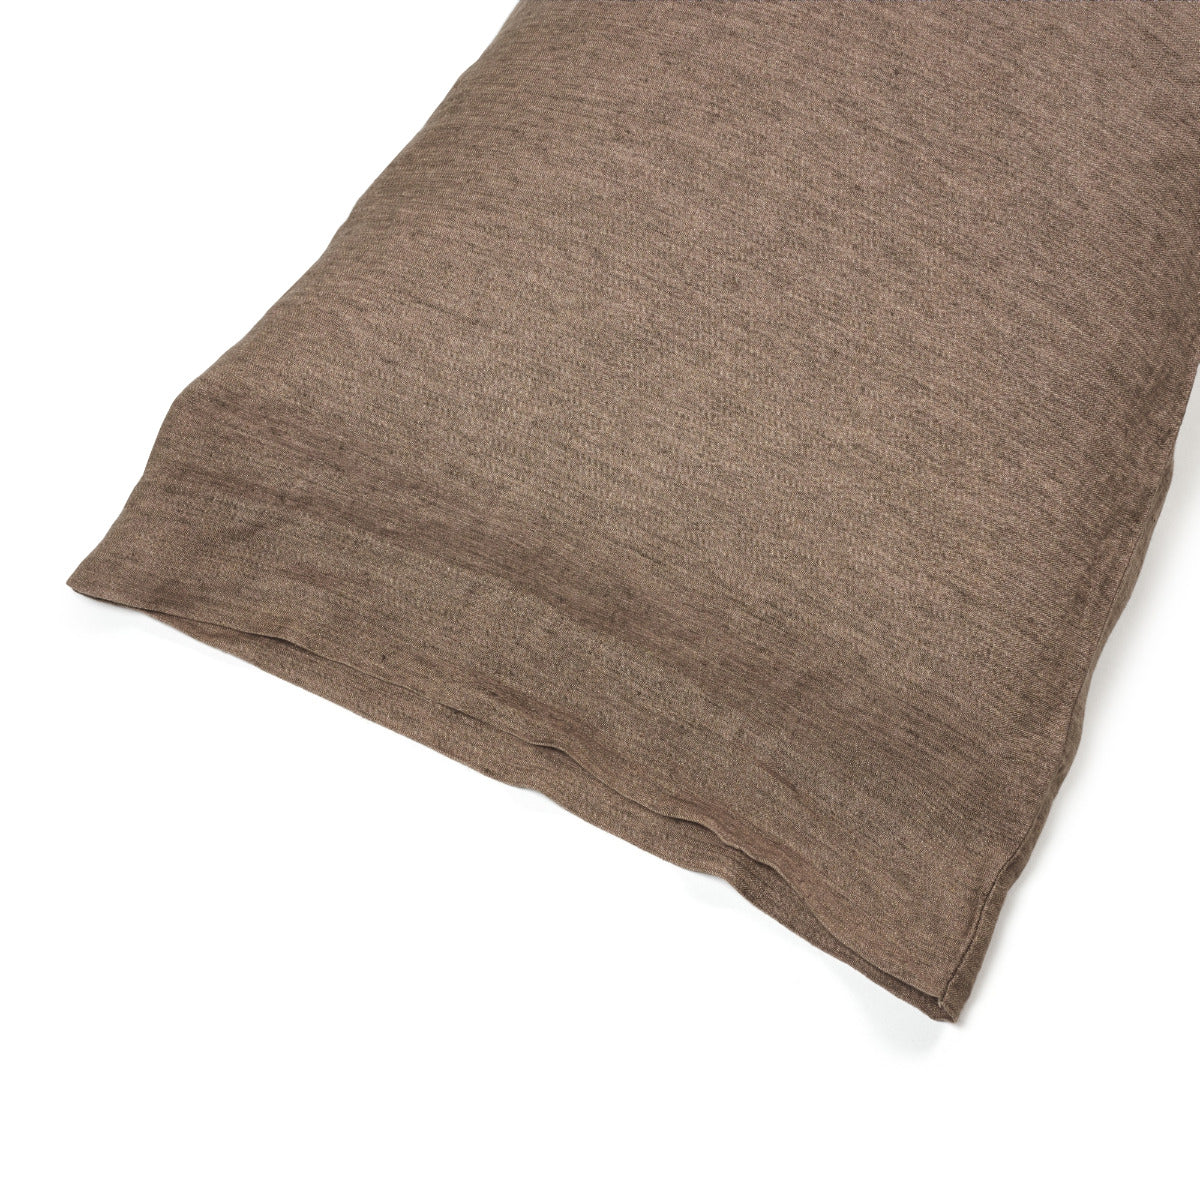 nottinghill pillowcases & shams by Libeco at adorn.house